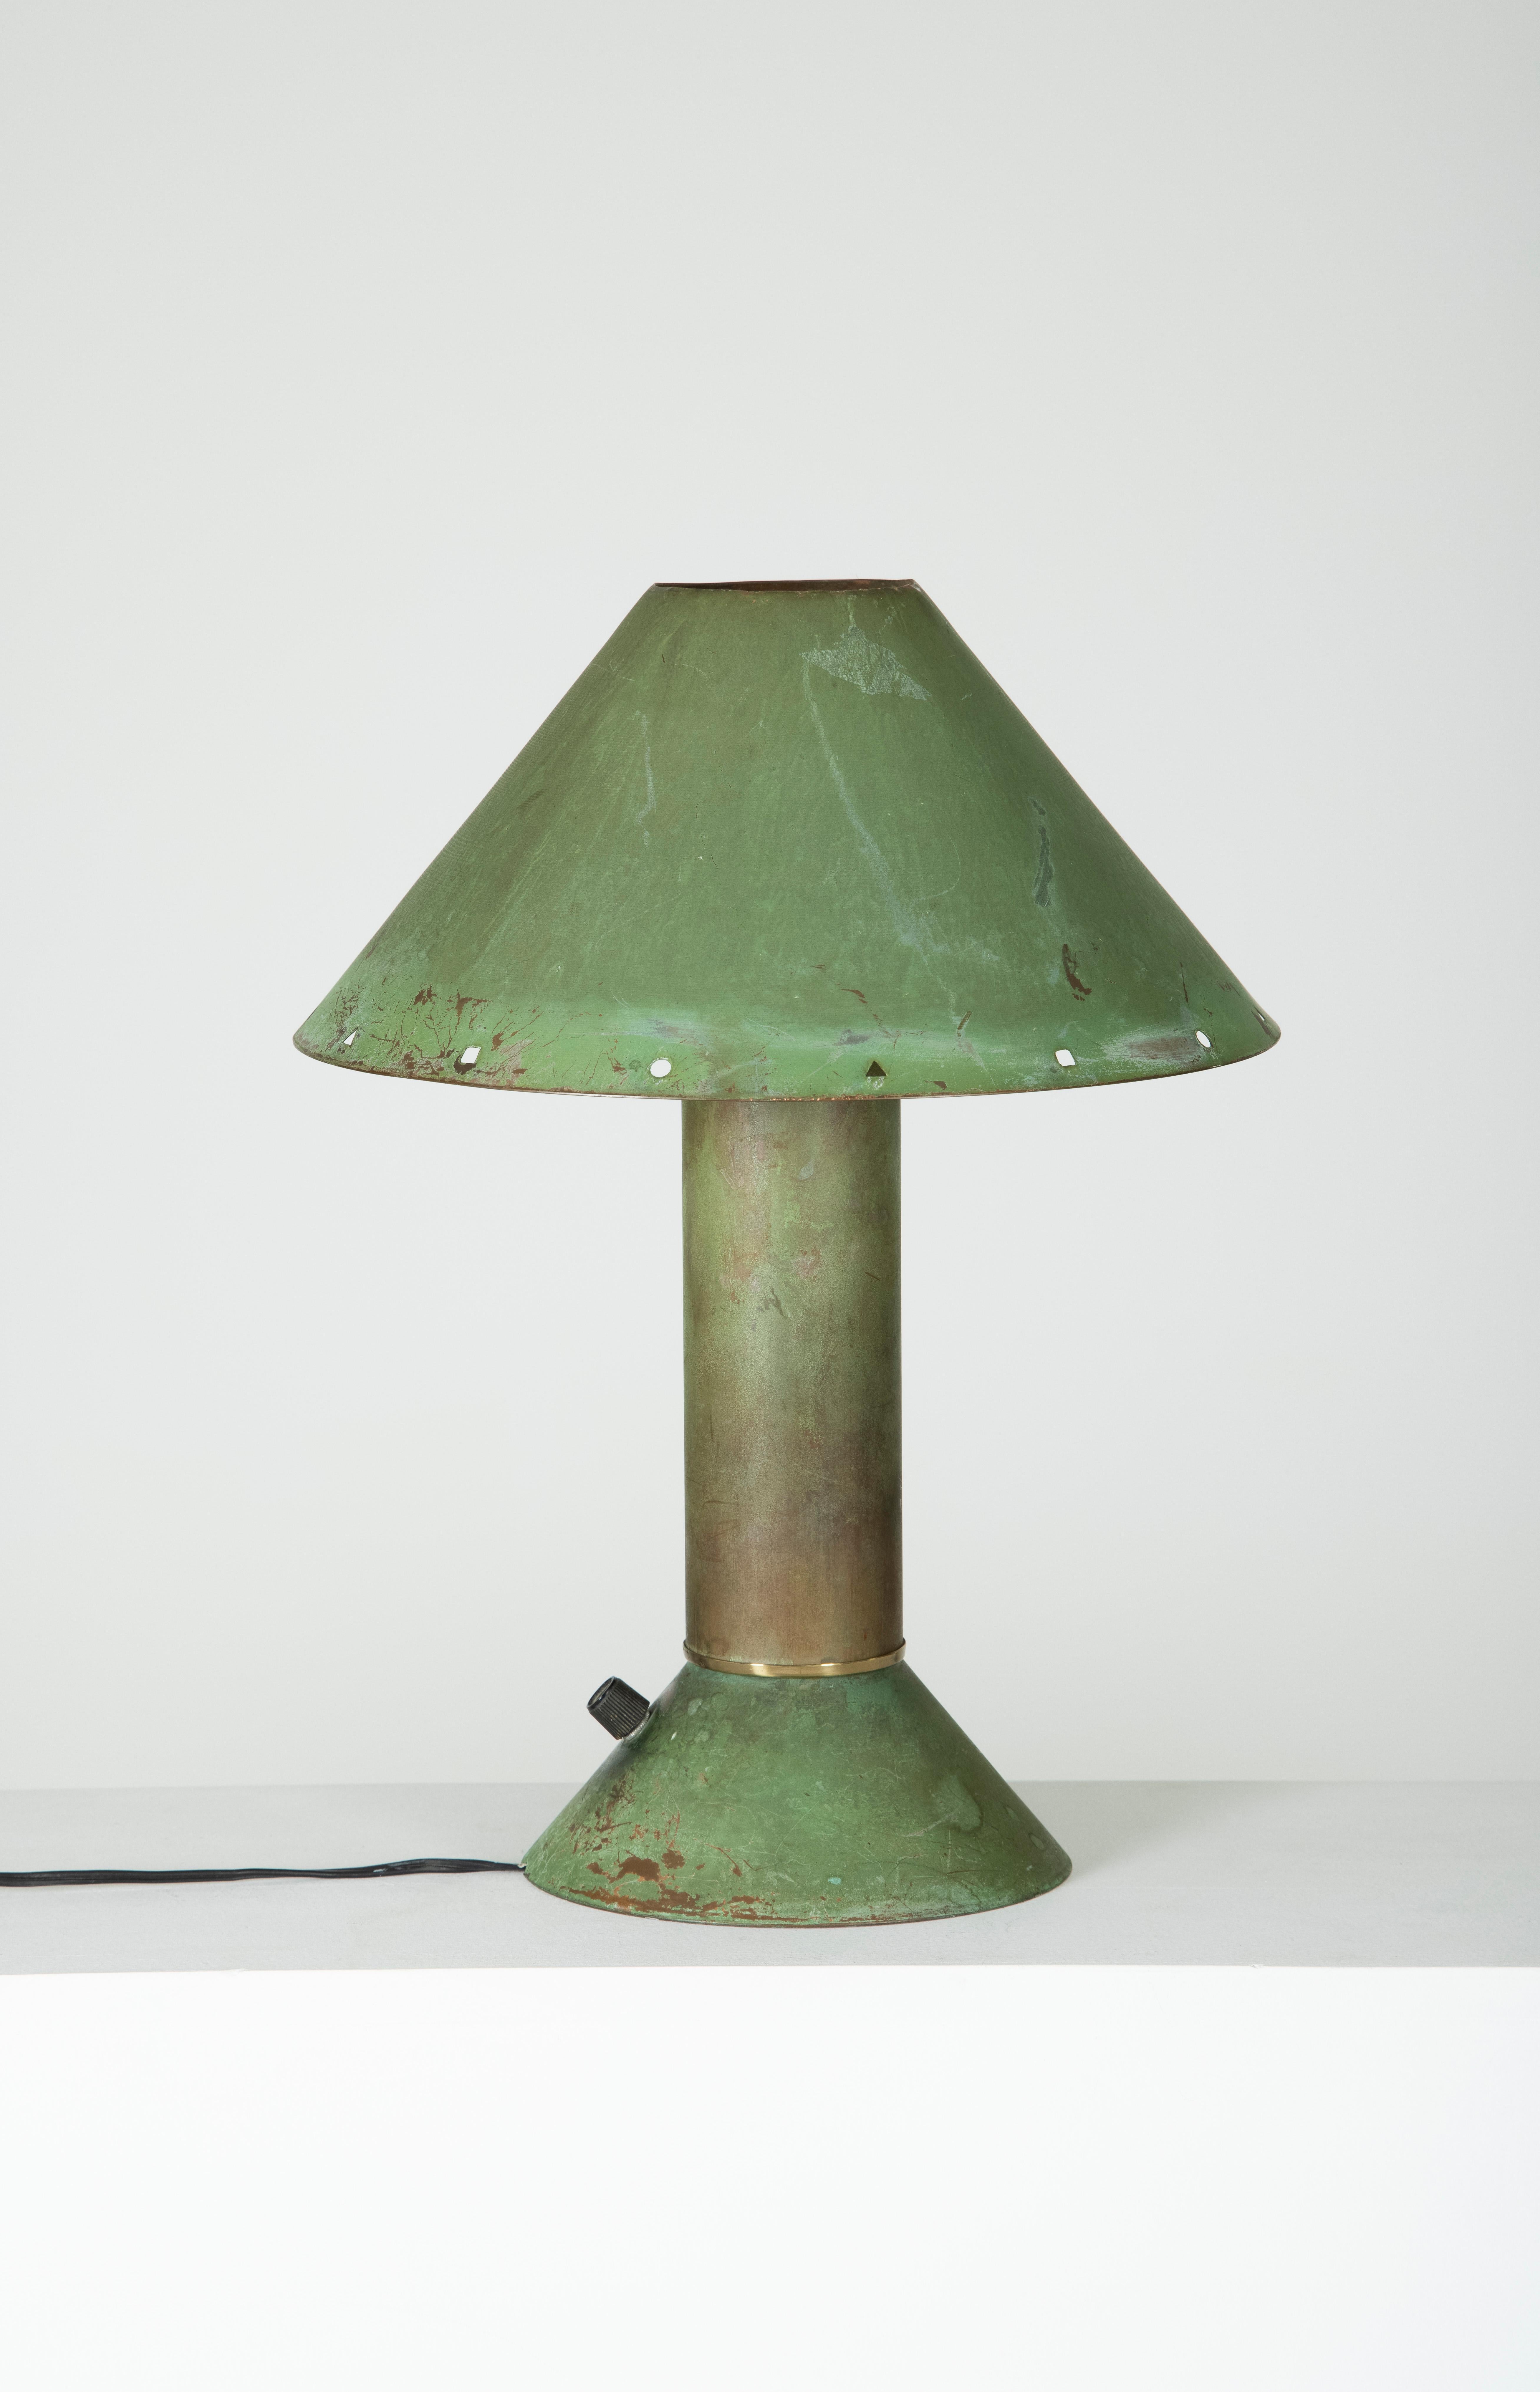 Table lamp in copper by Ron Rezek, from the 1990s. Typically made of galvanized steel, this one is a unique version in copper.
LP852